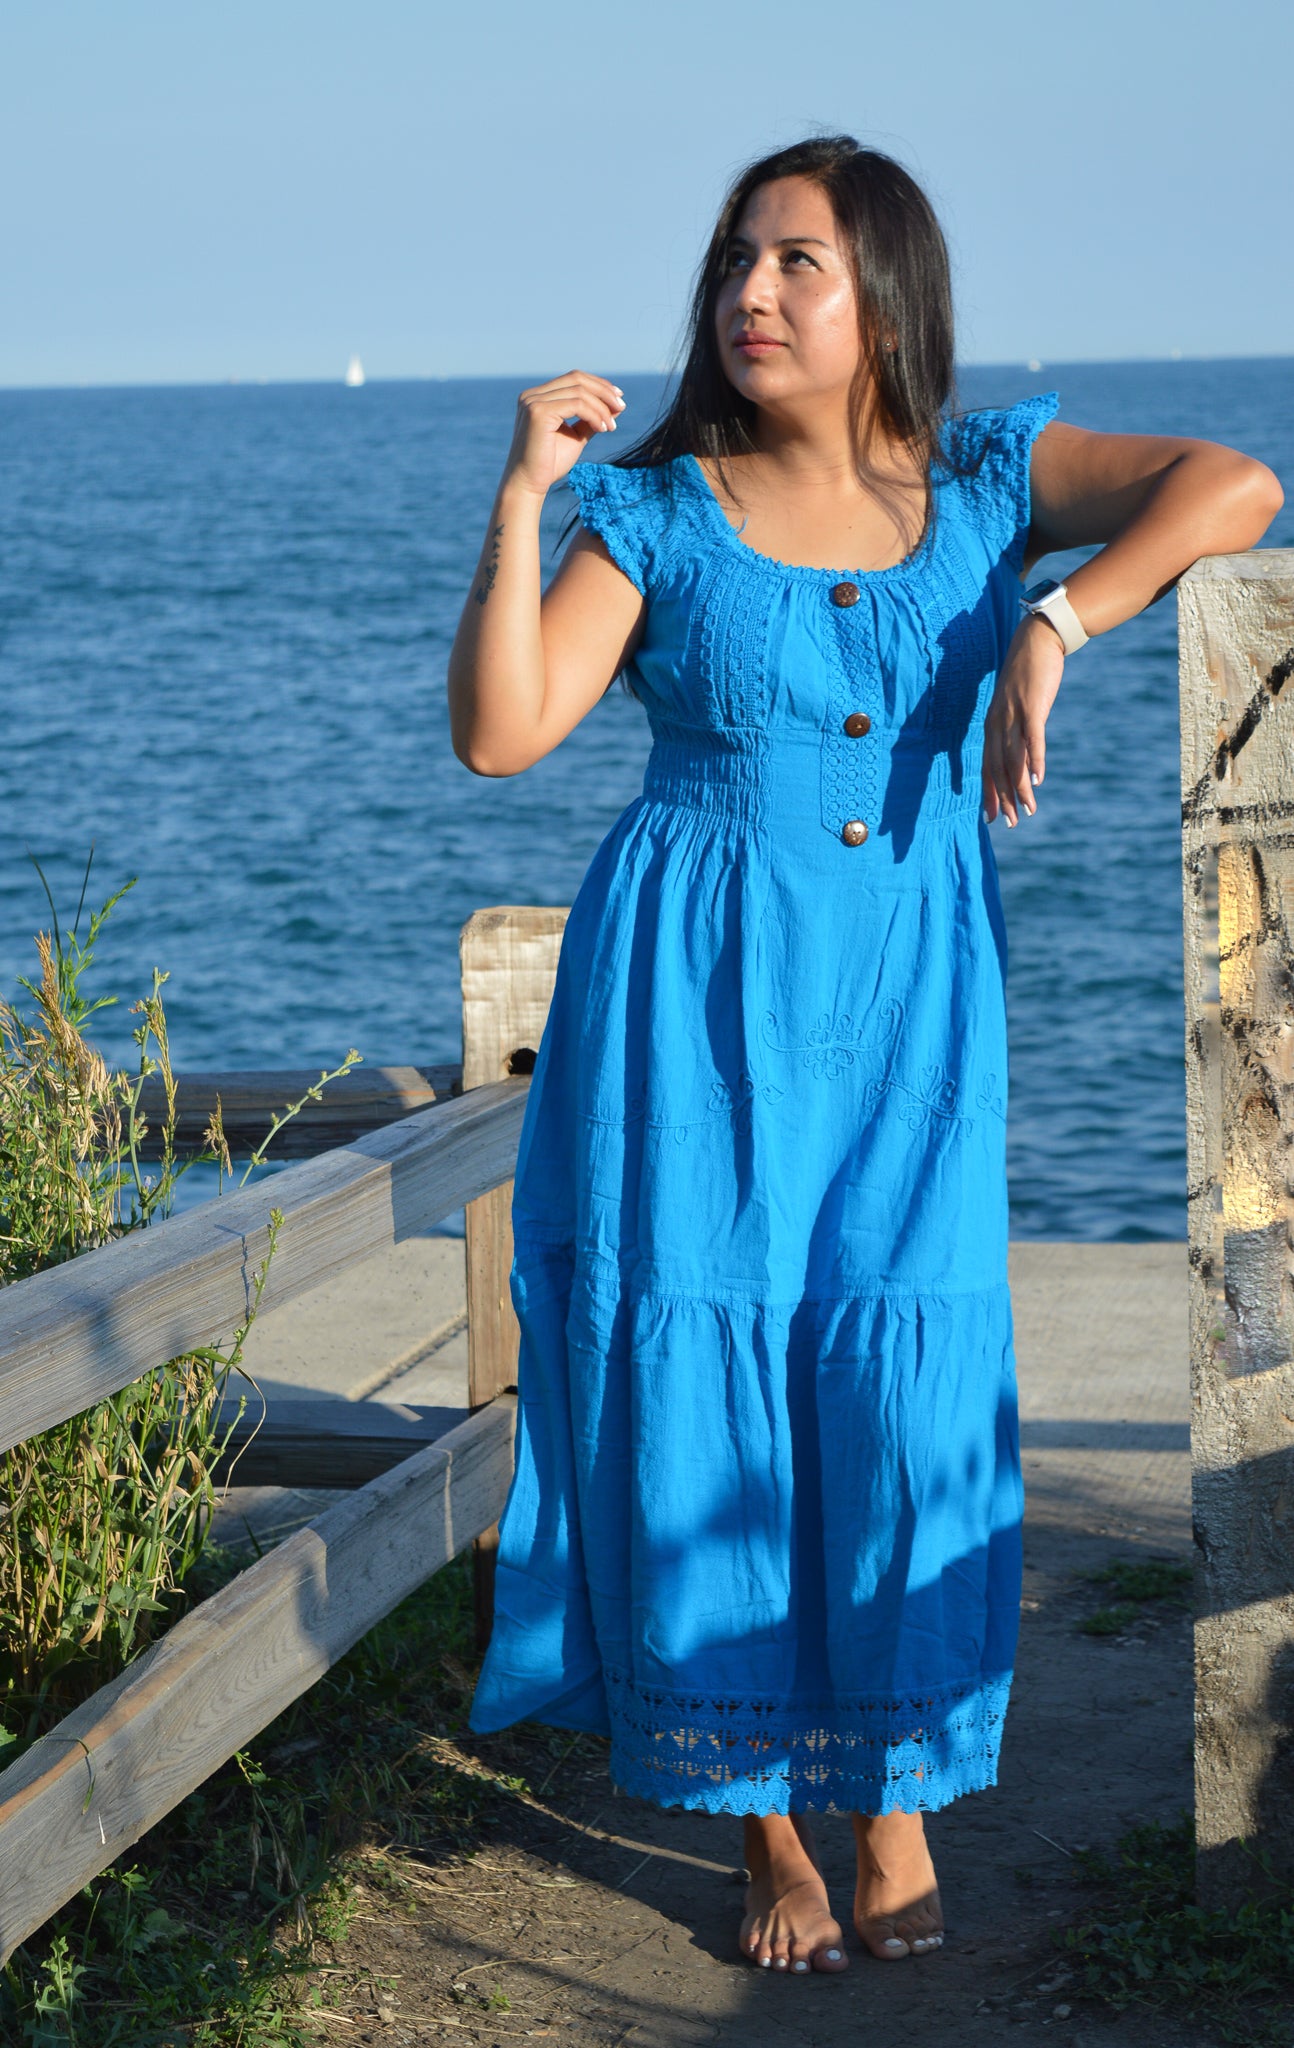 Woman wearing blue cotton dresss at chicago lake front. Sunny